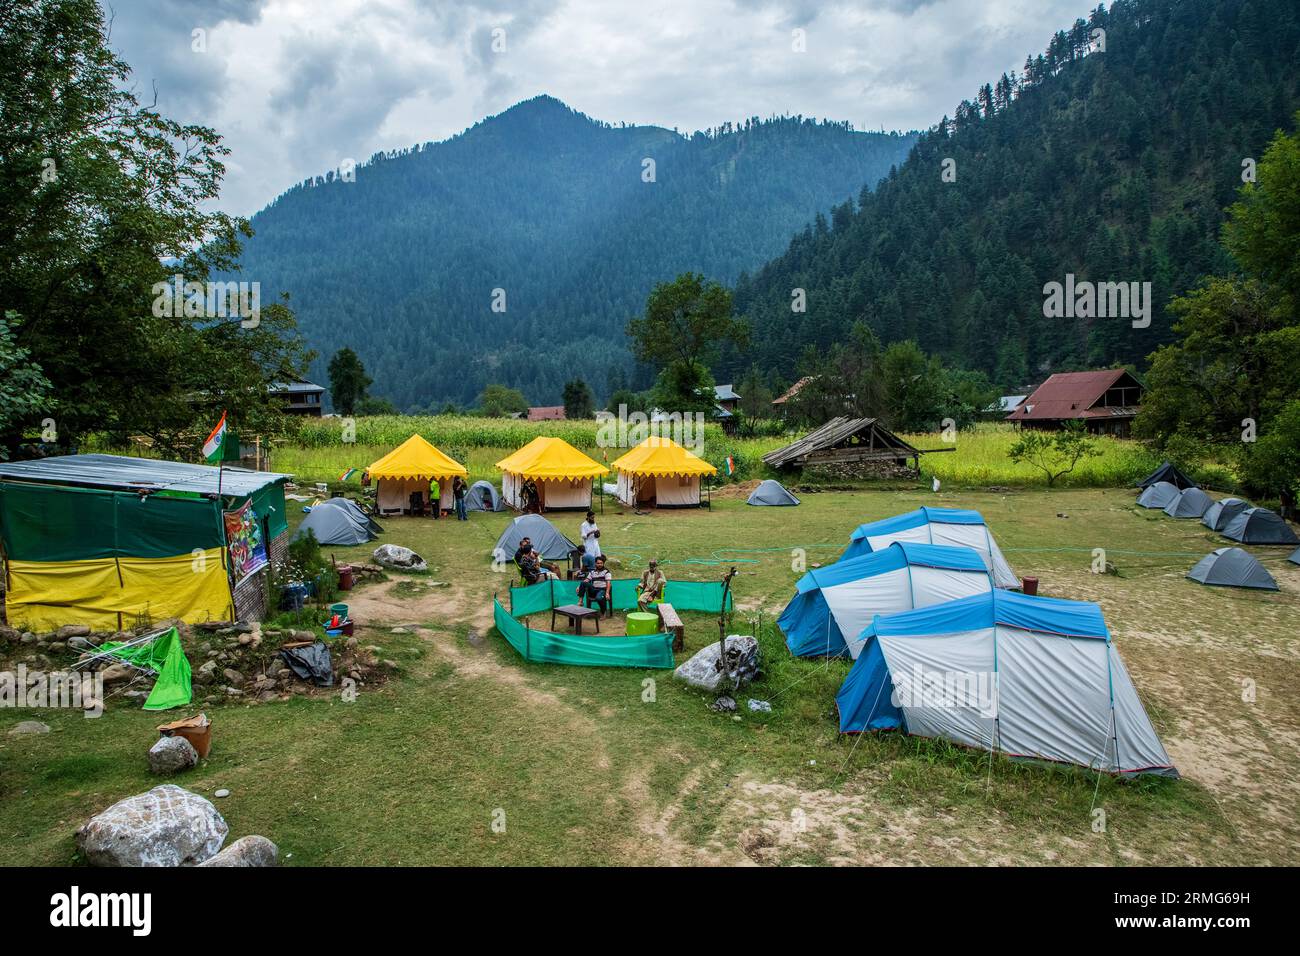 Keran Kupwara, India. 25th Aug, 2023. Camping tents are installed on the banks of Neelam river or Kishan Ganga that has divided Kashmir into two parts controlled by nuclear rivals India and Pakistan. The river acts as a disputed line of control and flows through a village called Keran from both sides which is located on the northern side of Indian Kashmir's Border district Kupwara some 150kms from Srinagar and 93kms from Muzaffarabad, in the Pakistan side of Kashmir. (Photo by Faisal Bashir/SOPA Images/Sipa USA) Credit: Sipa USA/Alamy Live News Stock Photo